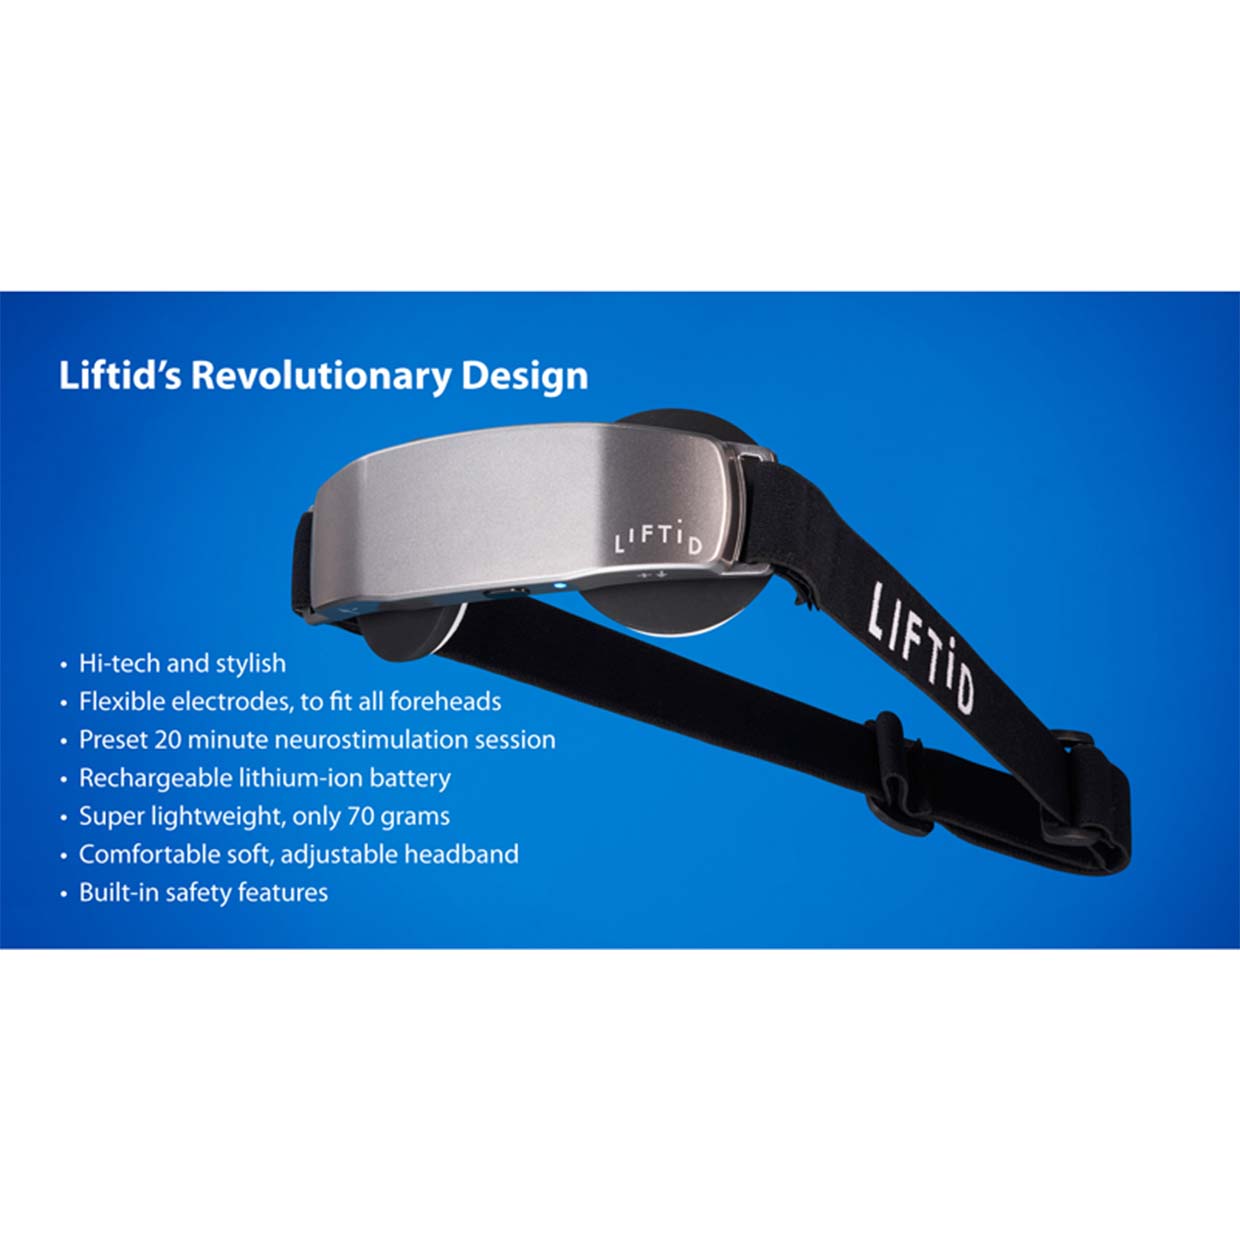 An image of a liftid tdcs device with its benefits being displayed with white text